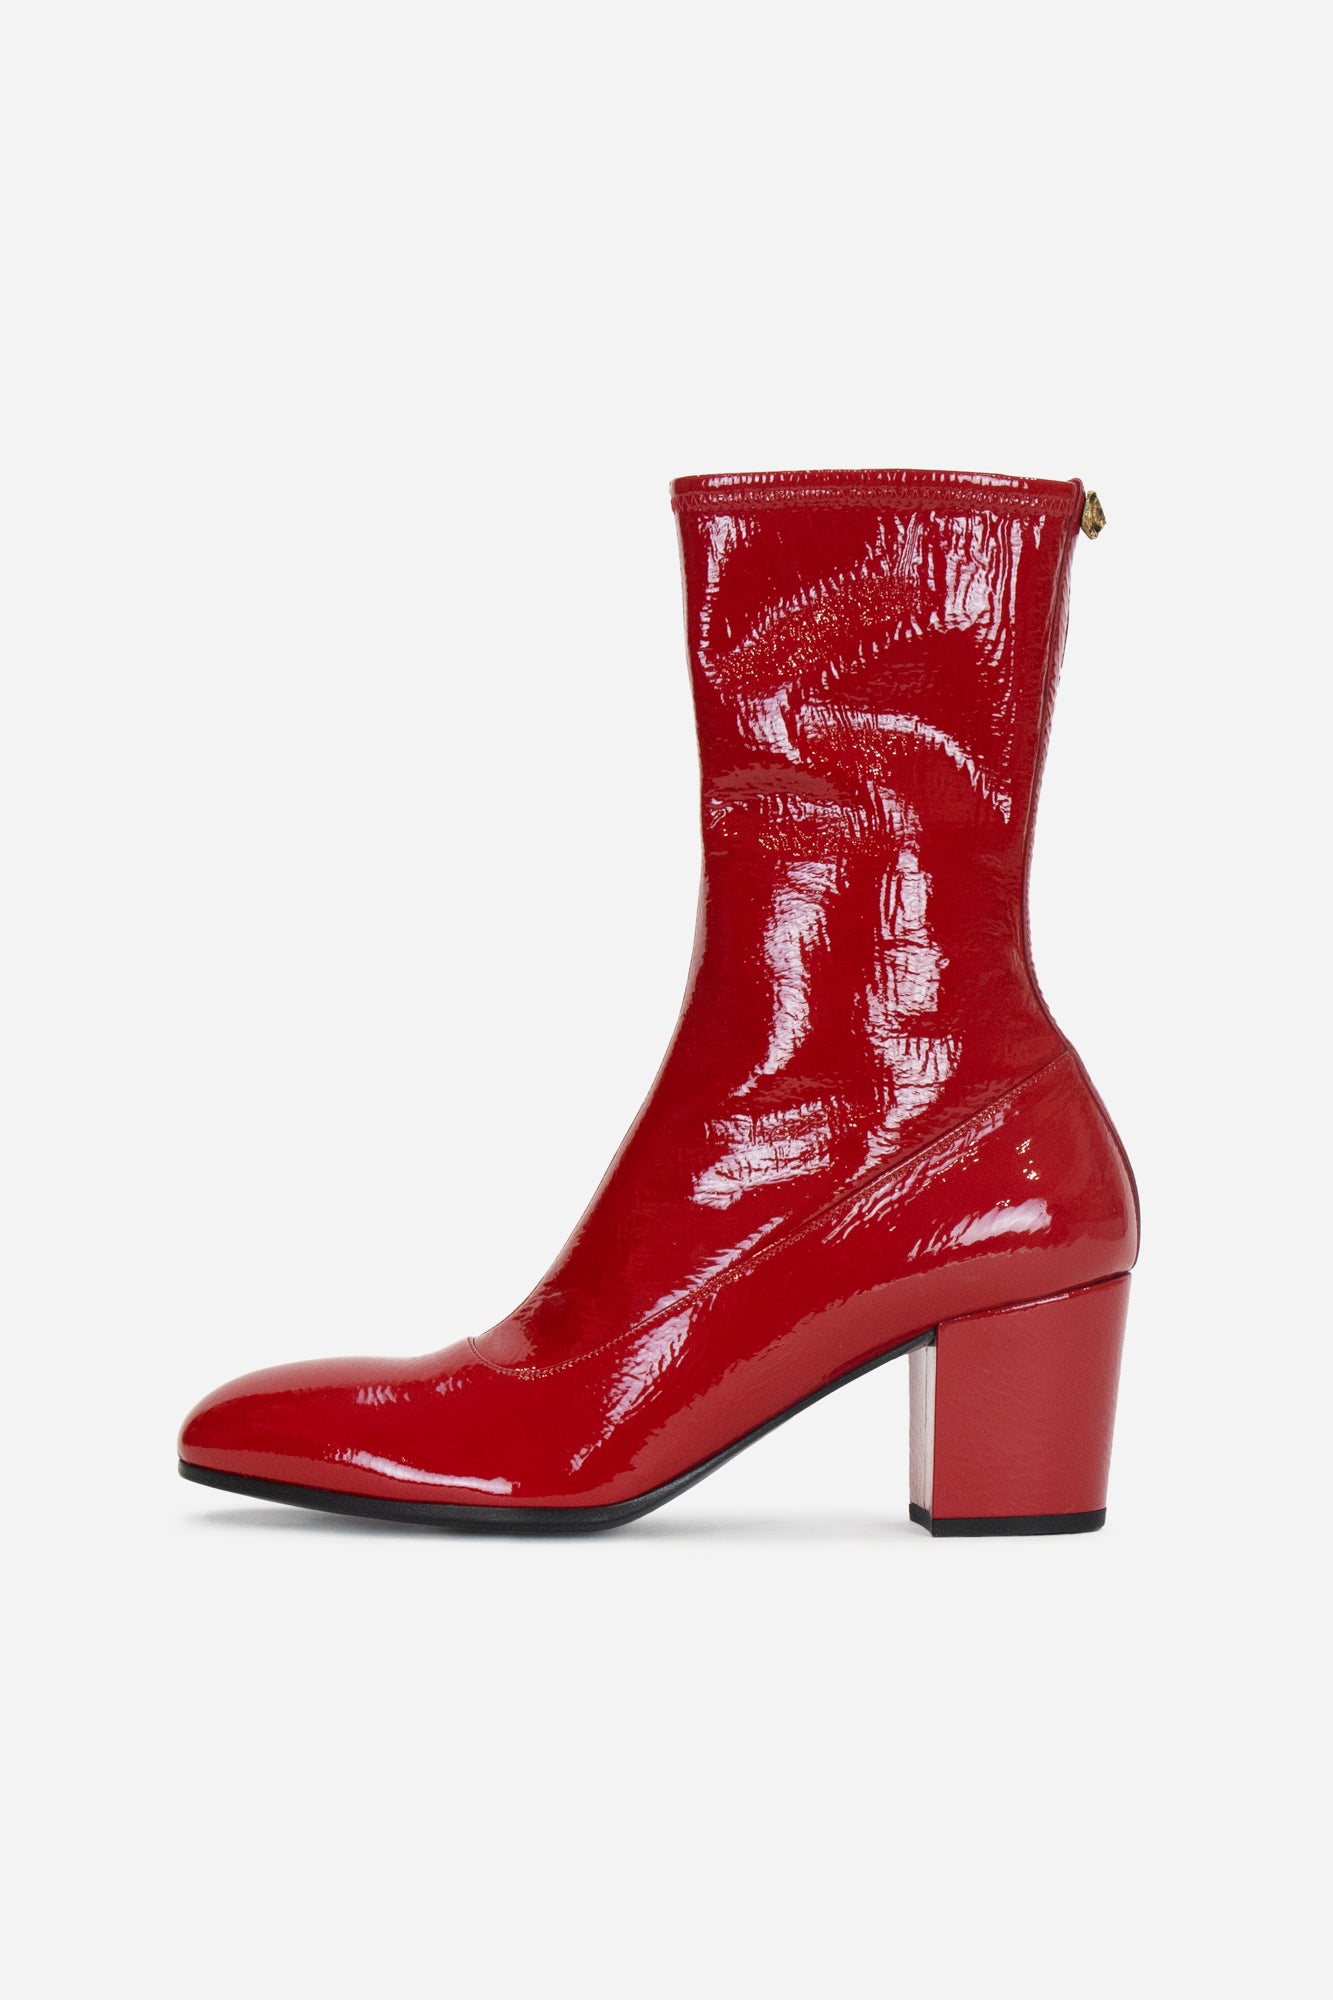 Red Patent Leather Calf Boots